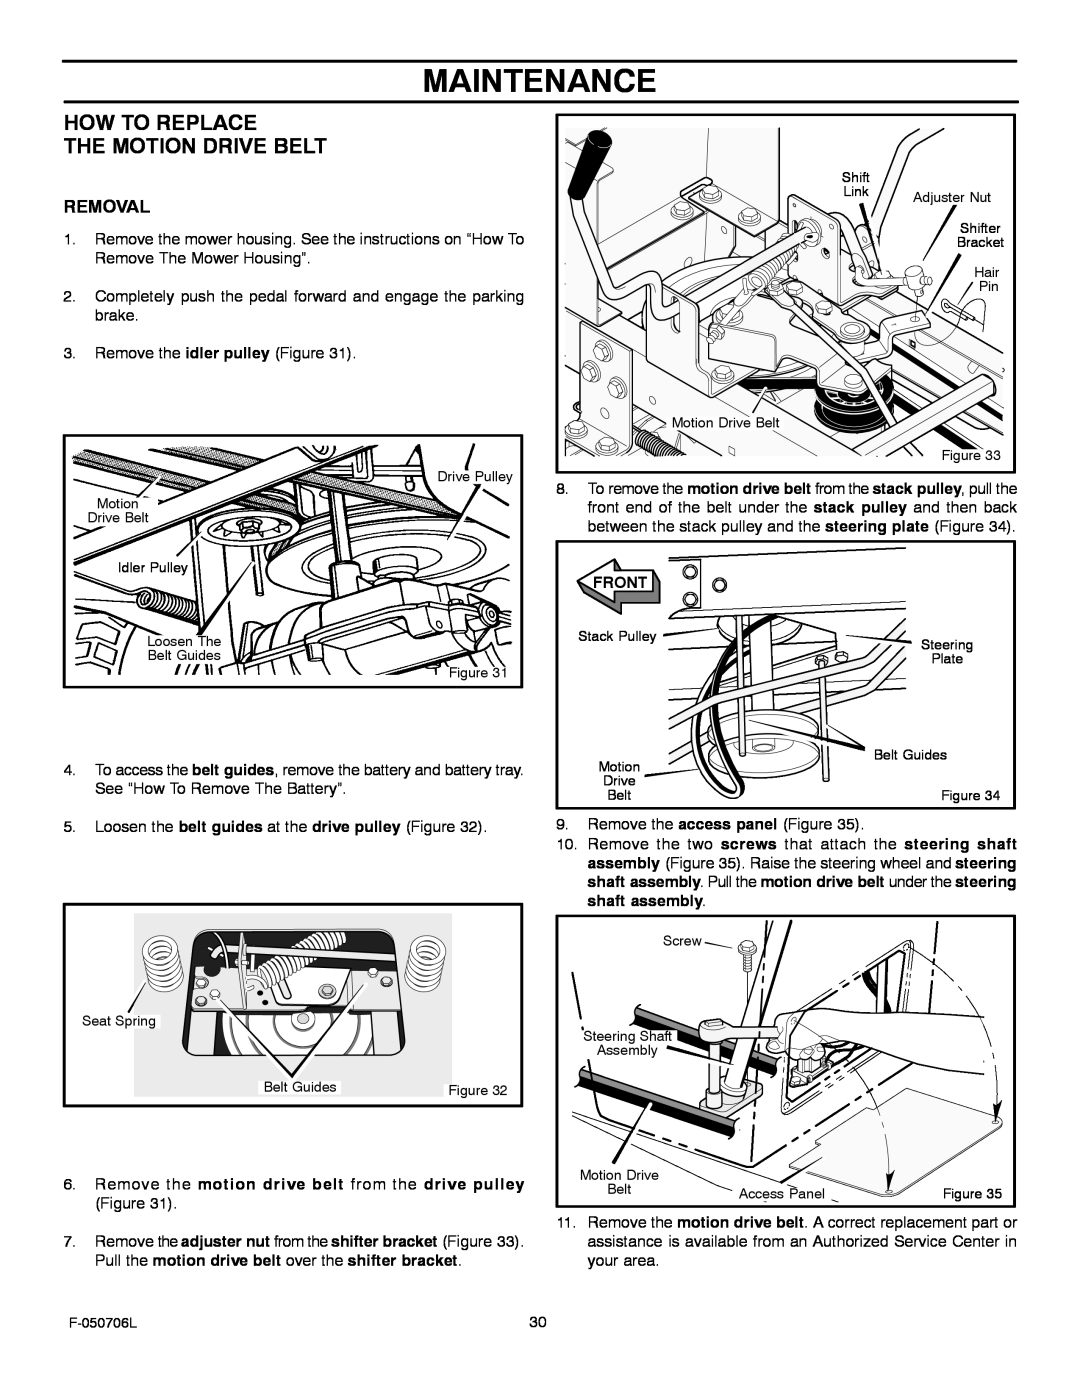 Murray 425014x92B manual Maintenance, How To Replace The Motion Drive Belt, Removal 